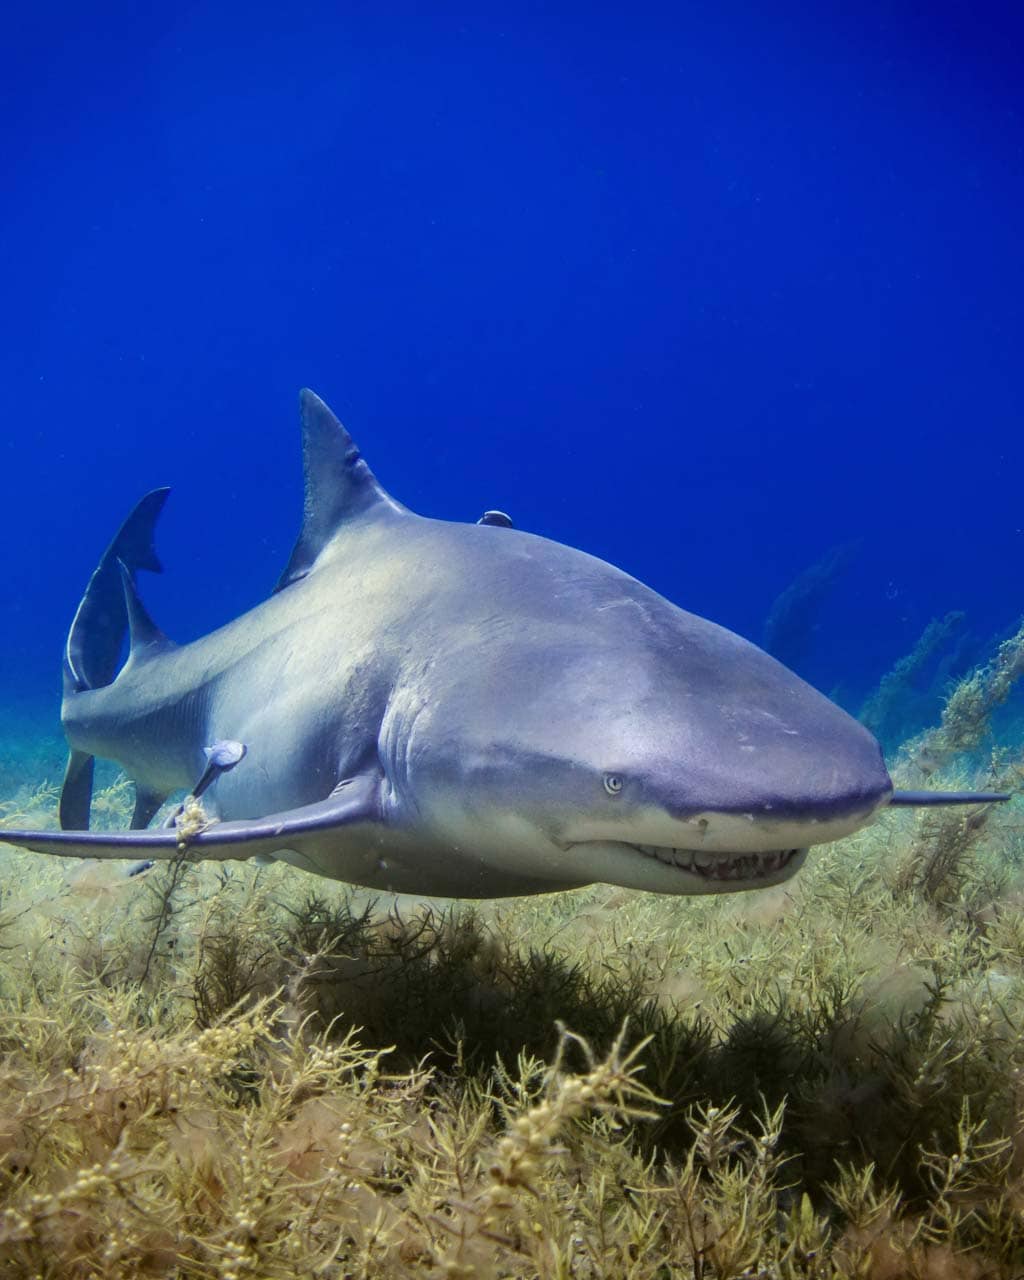 Shark in blue water - How to Avoid Shark Attacks While Swimming